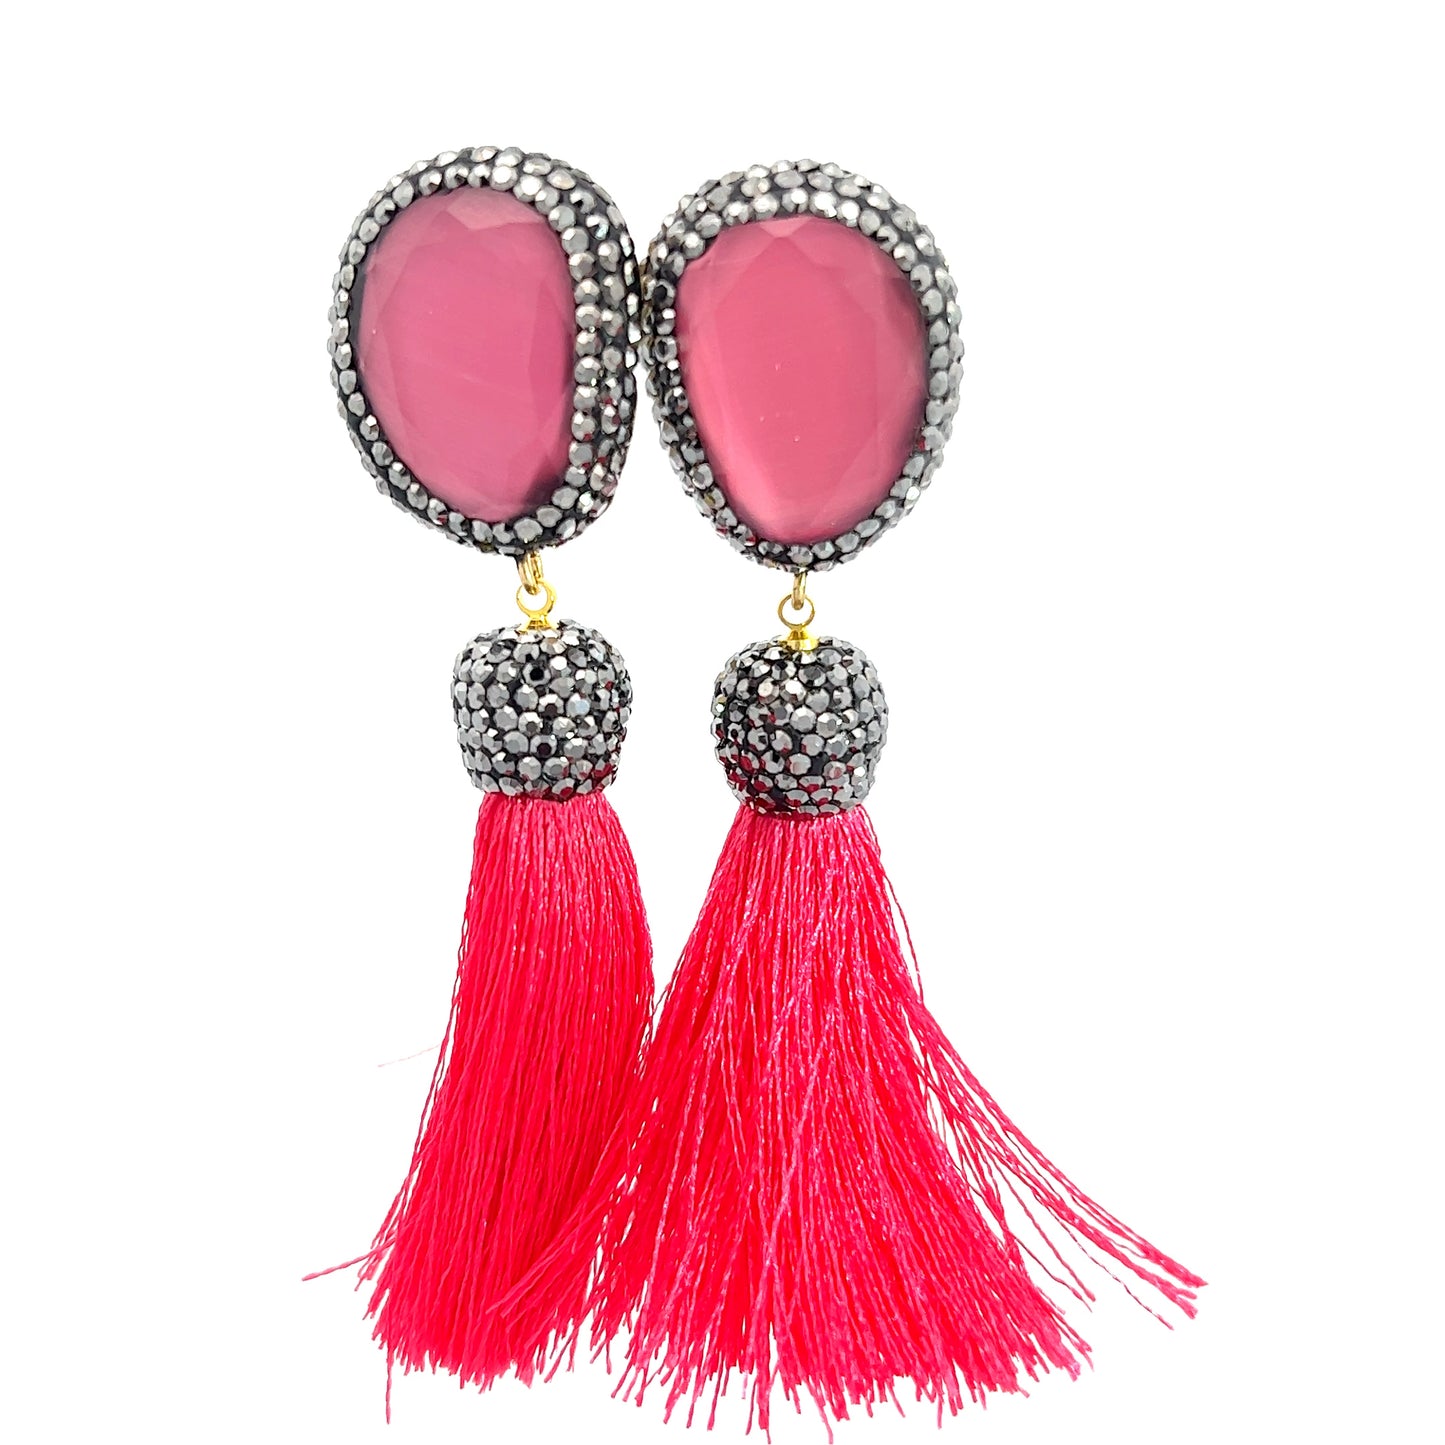 Hot Pink Tassel & Crystal Earring - Born To Glam